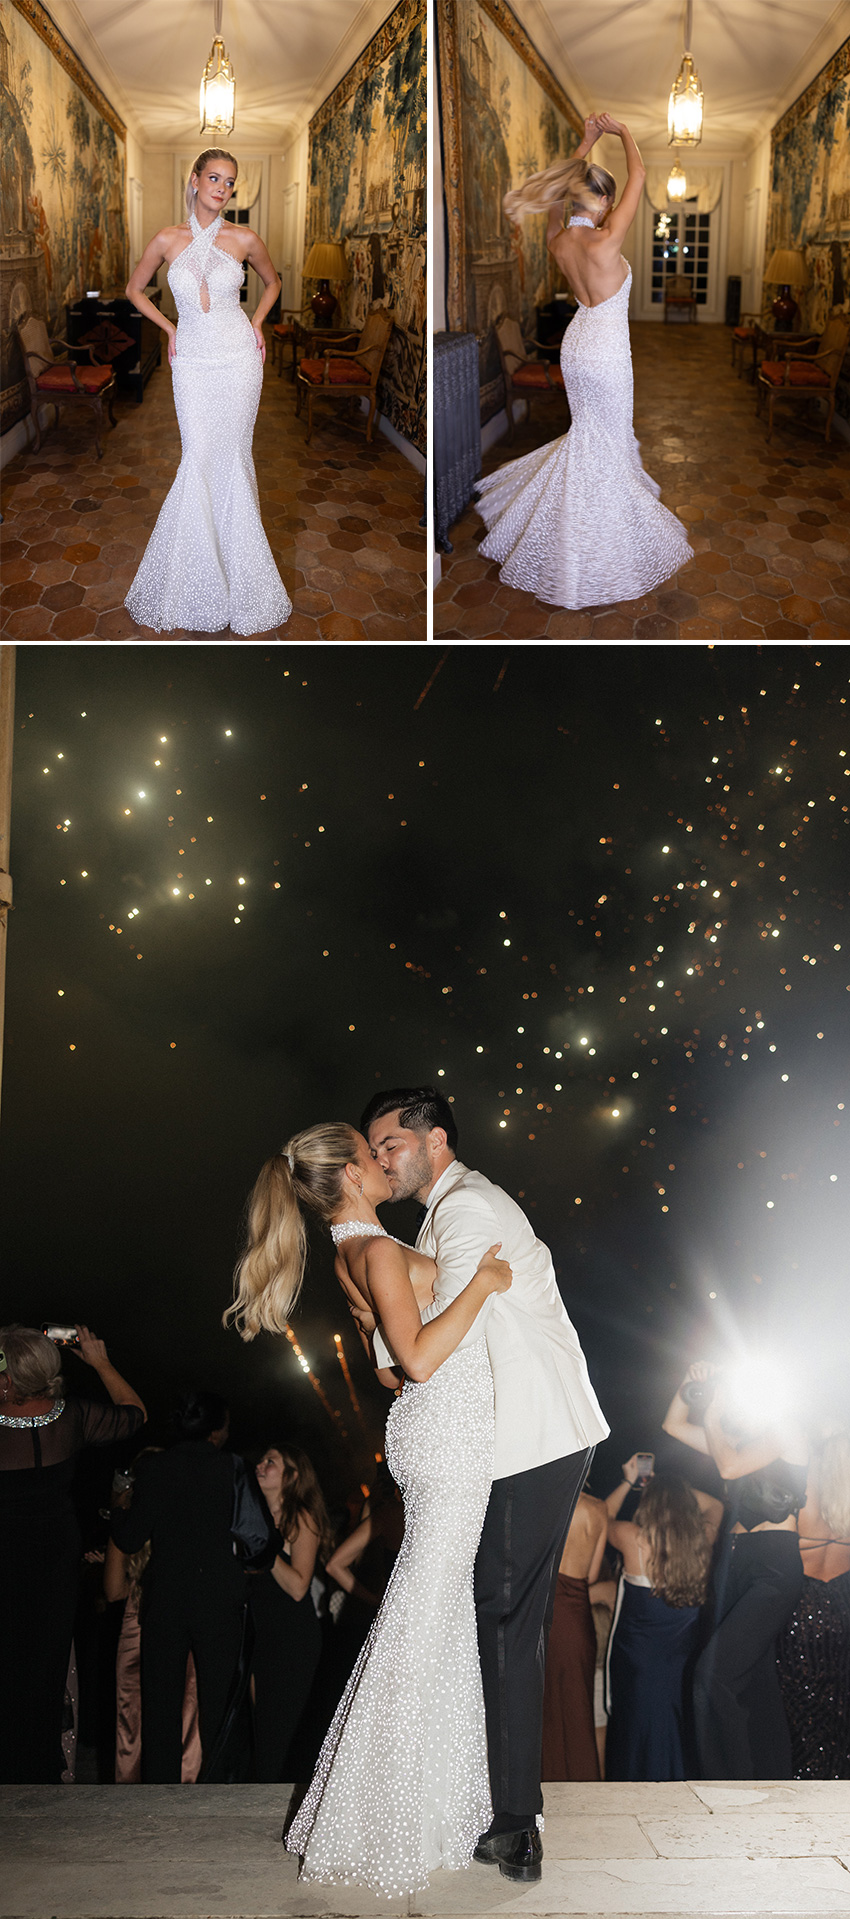 Hannah Godwin and Dylan Barbour wedding in France